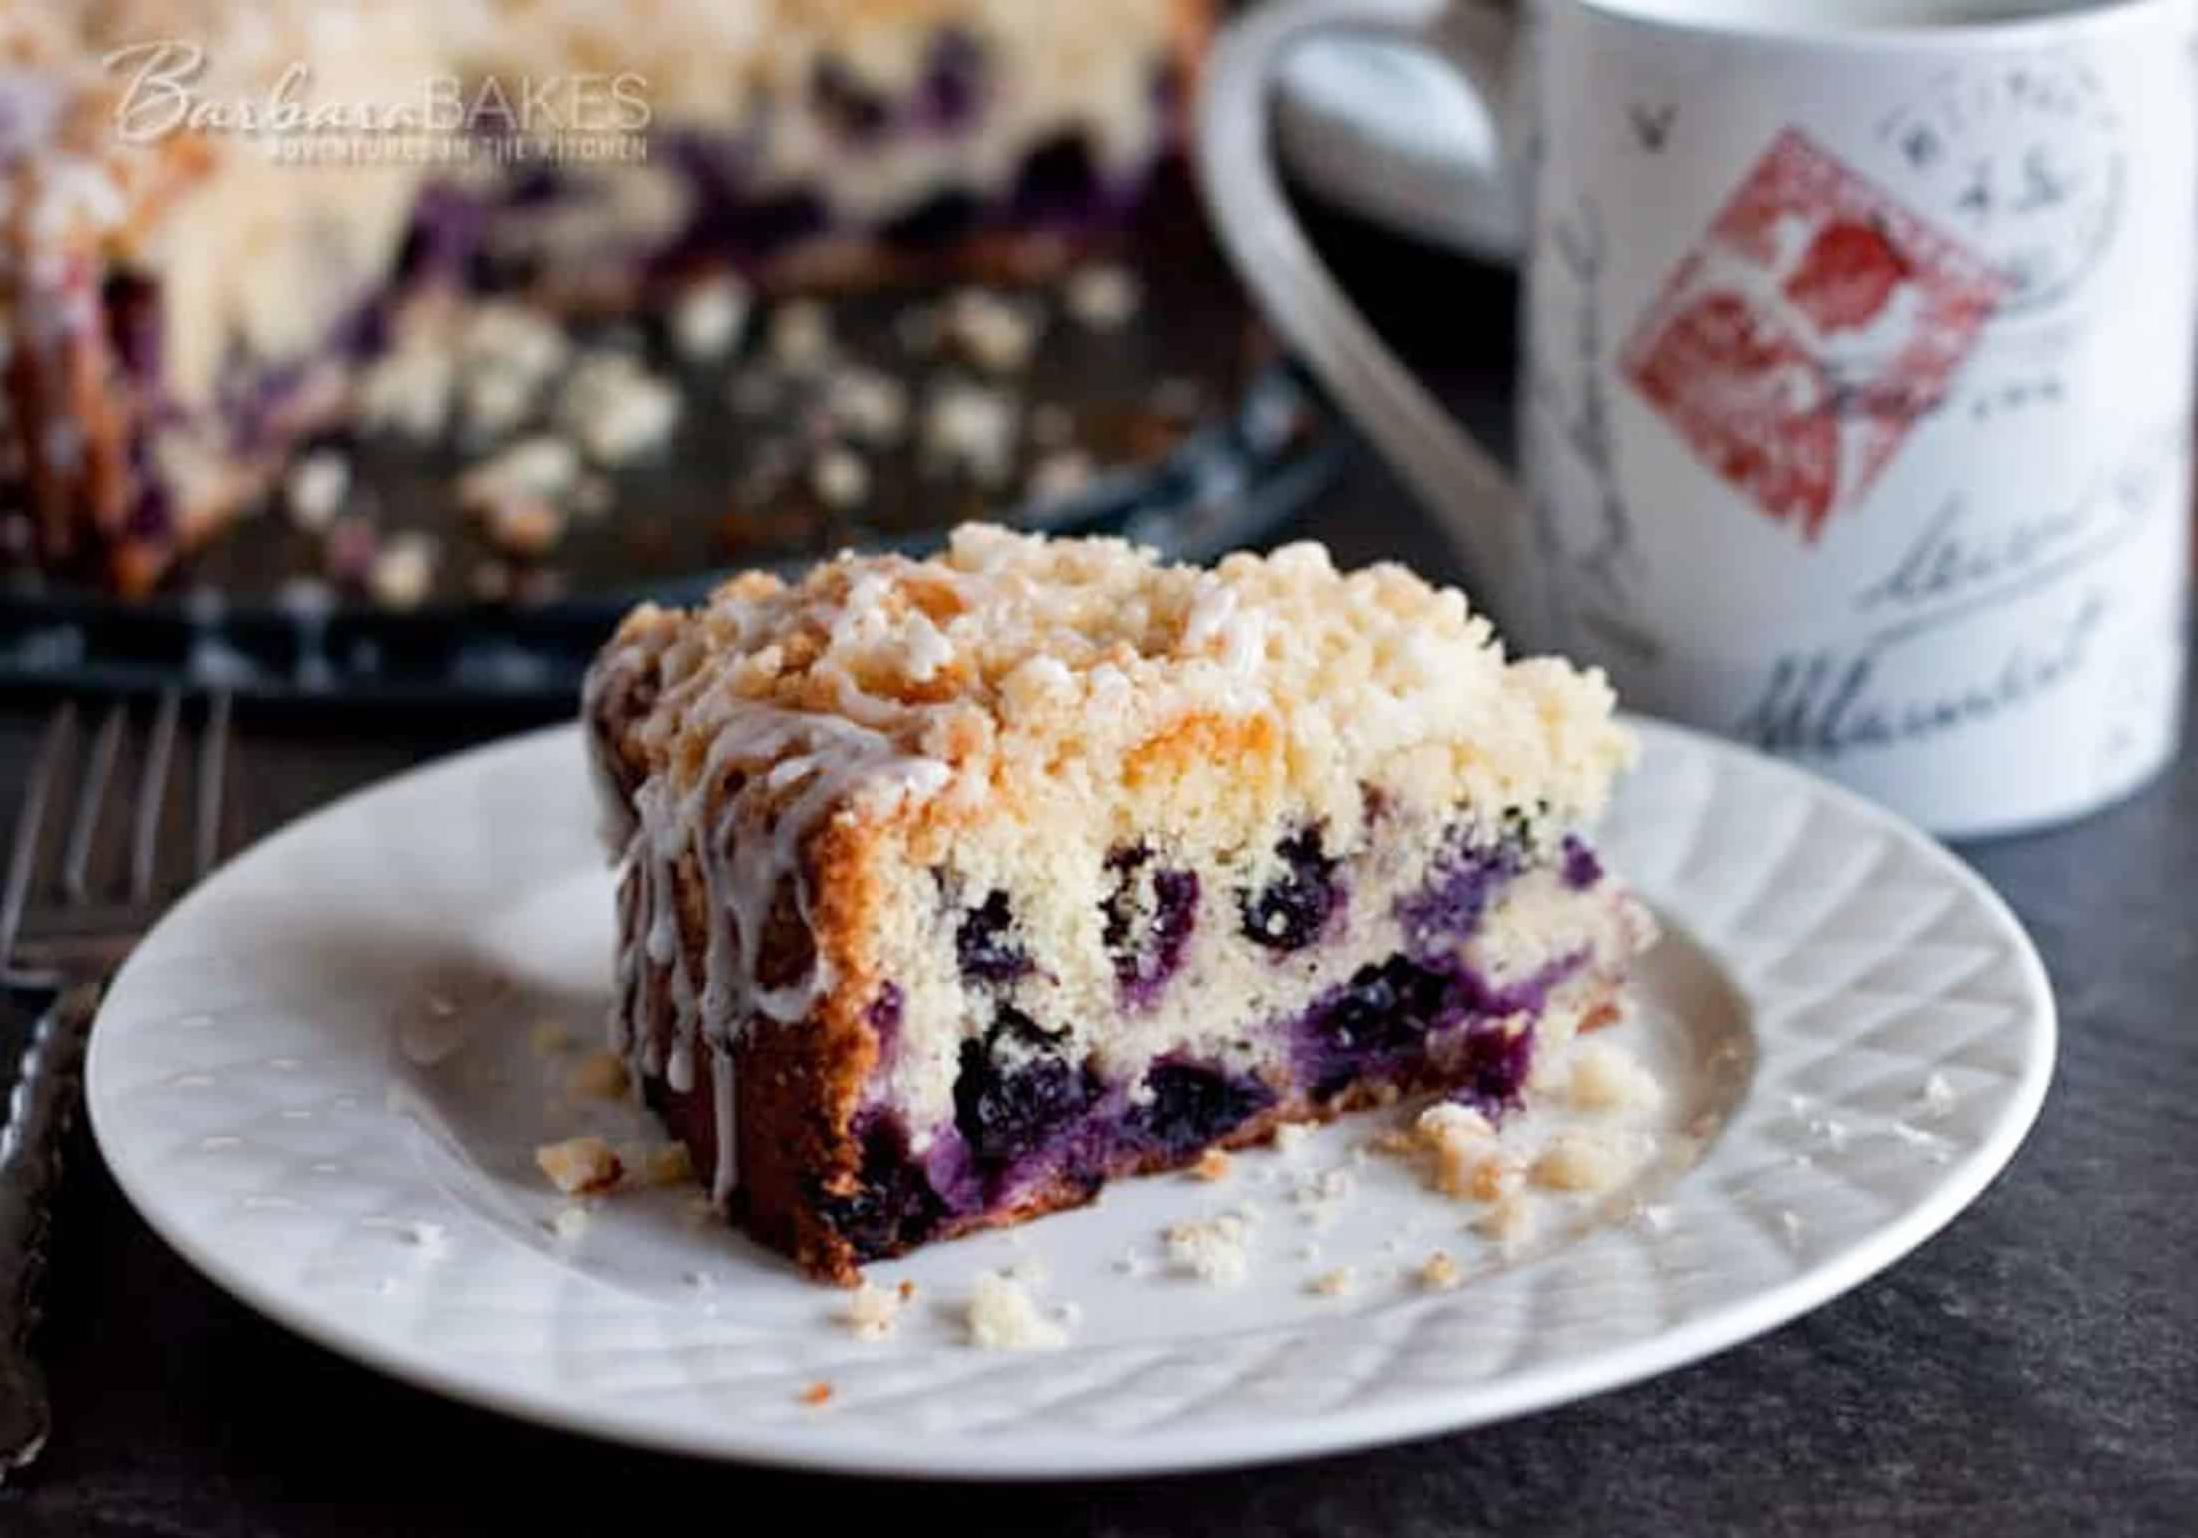  The combination of blueberries and lemon in our cake creates an explosion of flavor in your mouth!